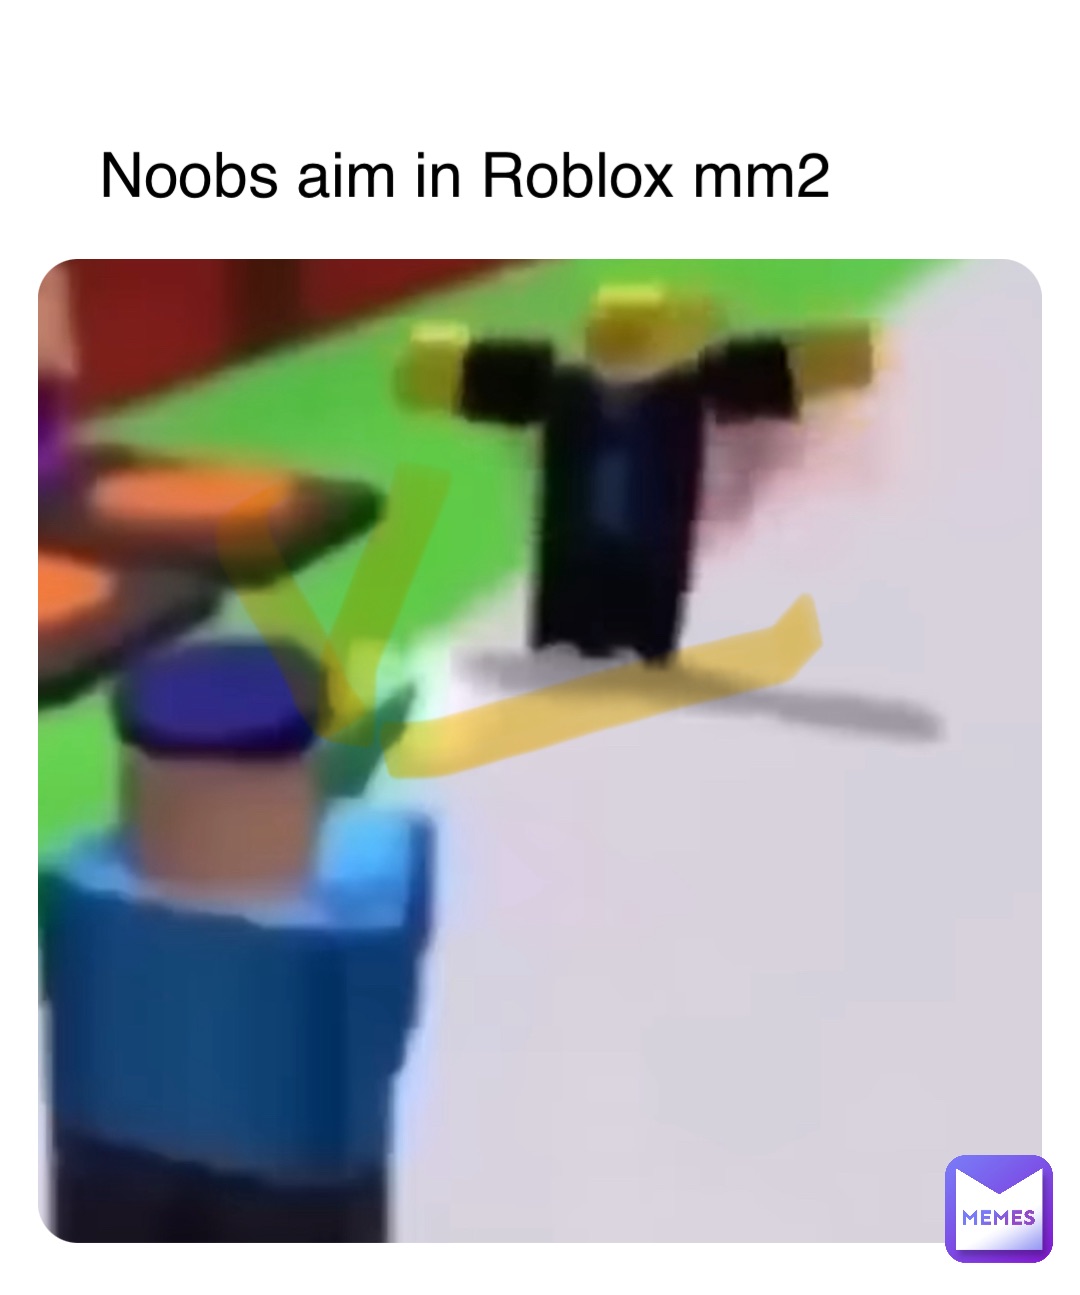 Double tap to edit Noobs aim in Roblox mm2